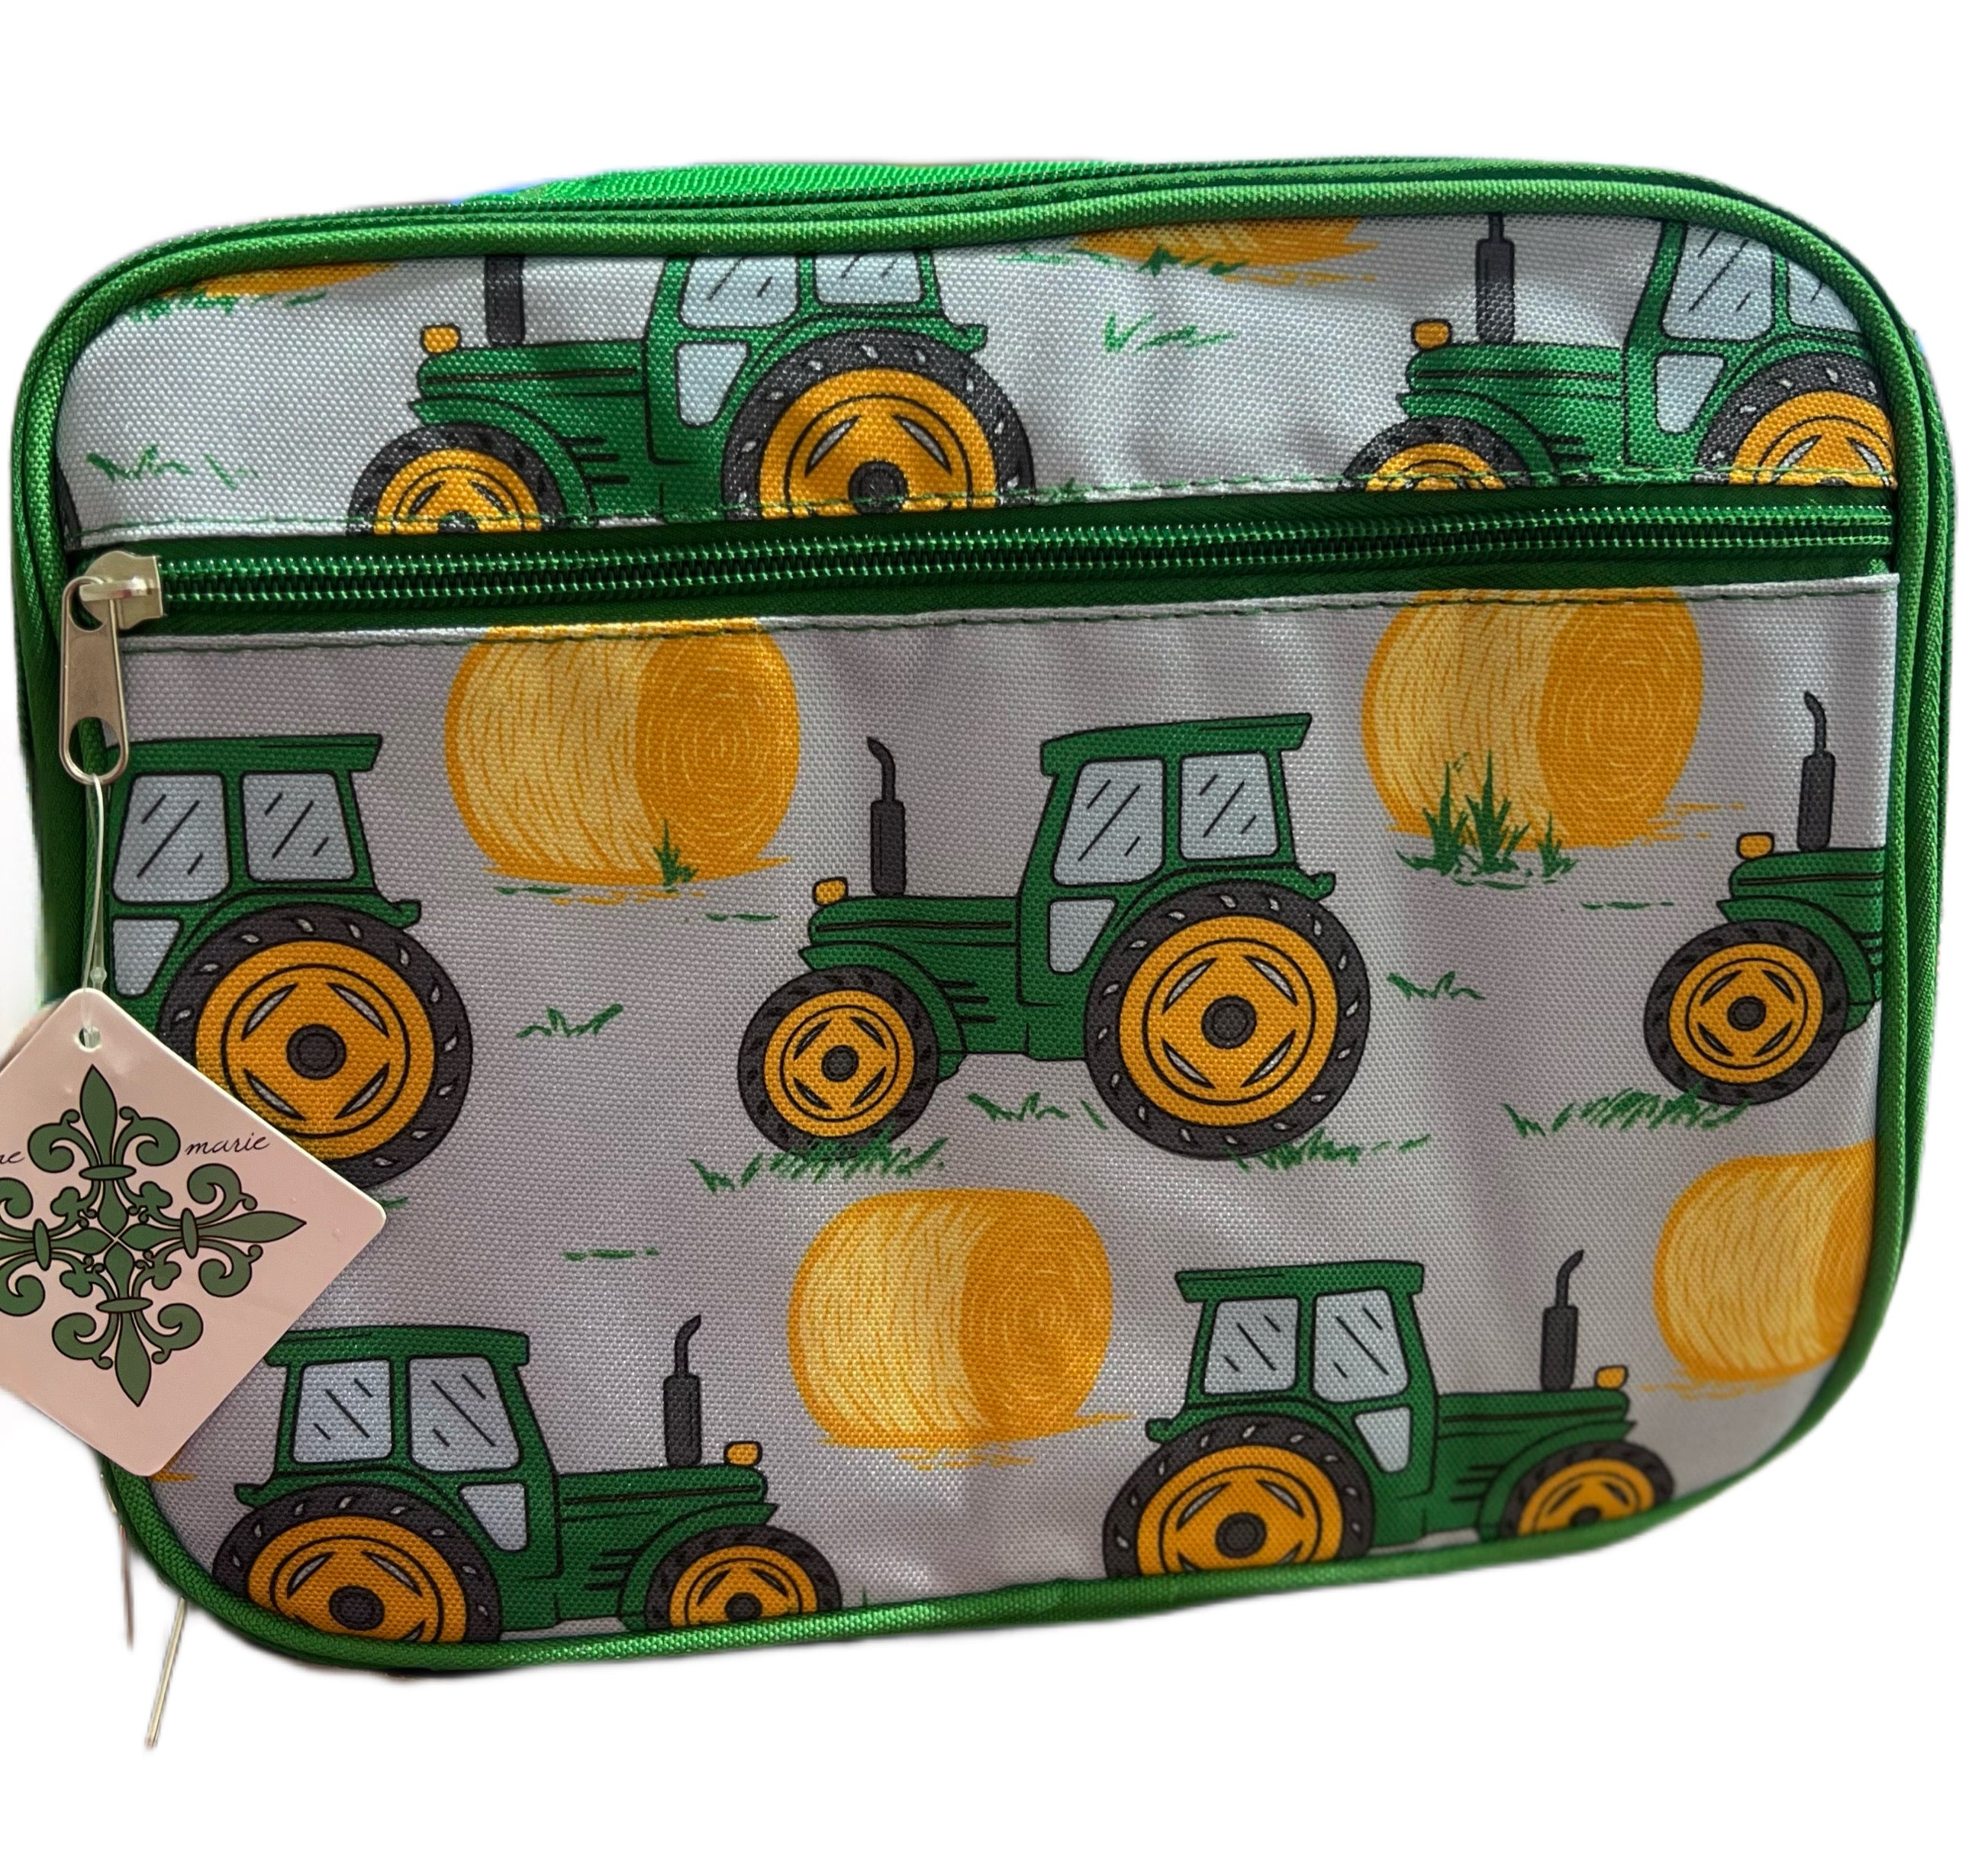 Jane Marie - Kids Lunch Box, Lovely Leopard – Kitchen Store & More